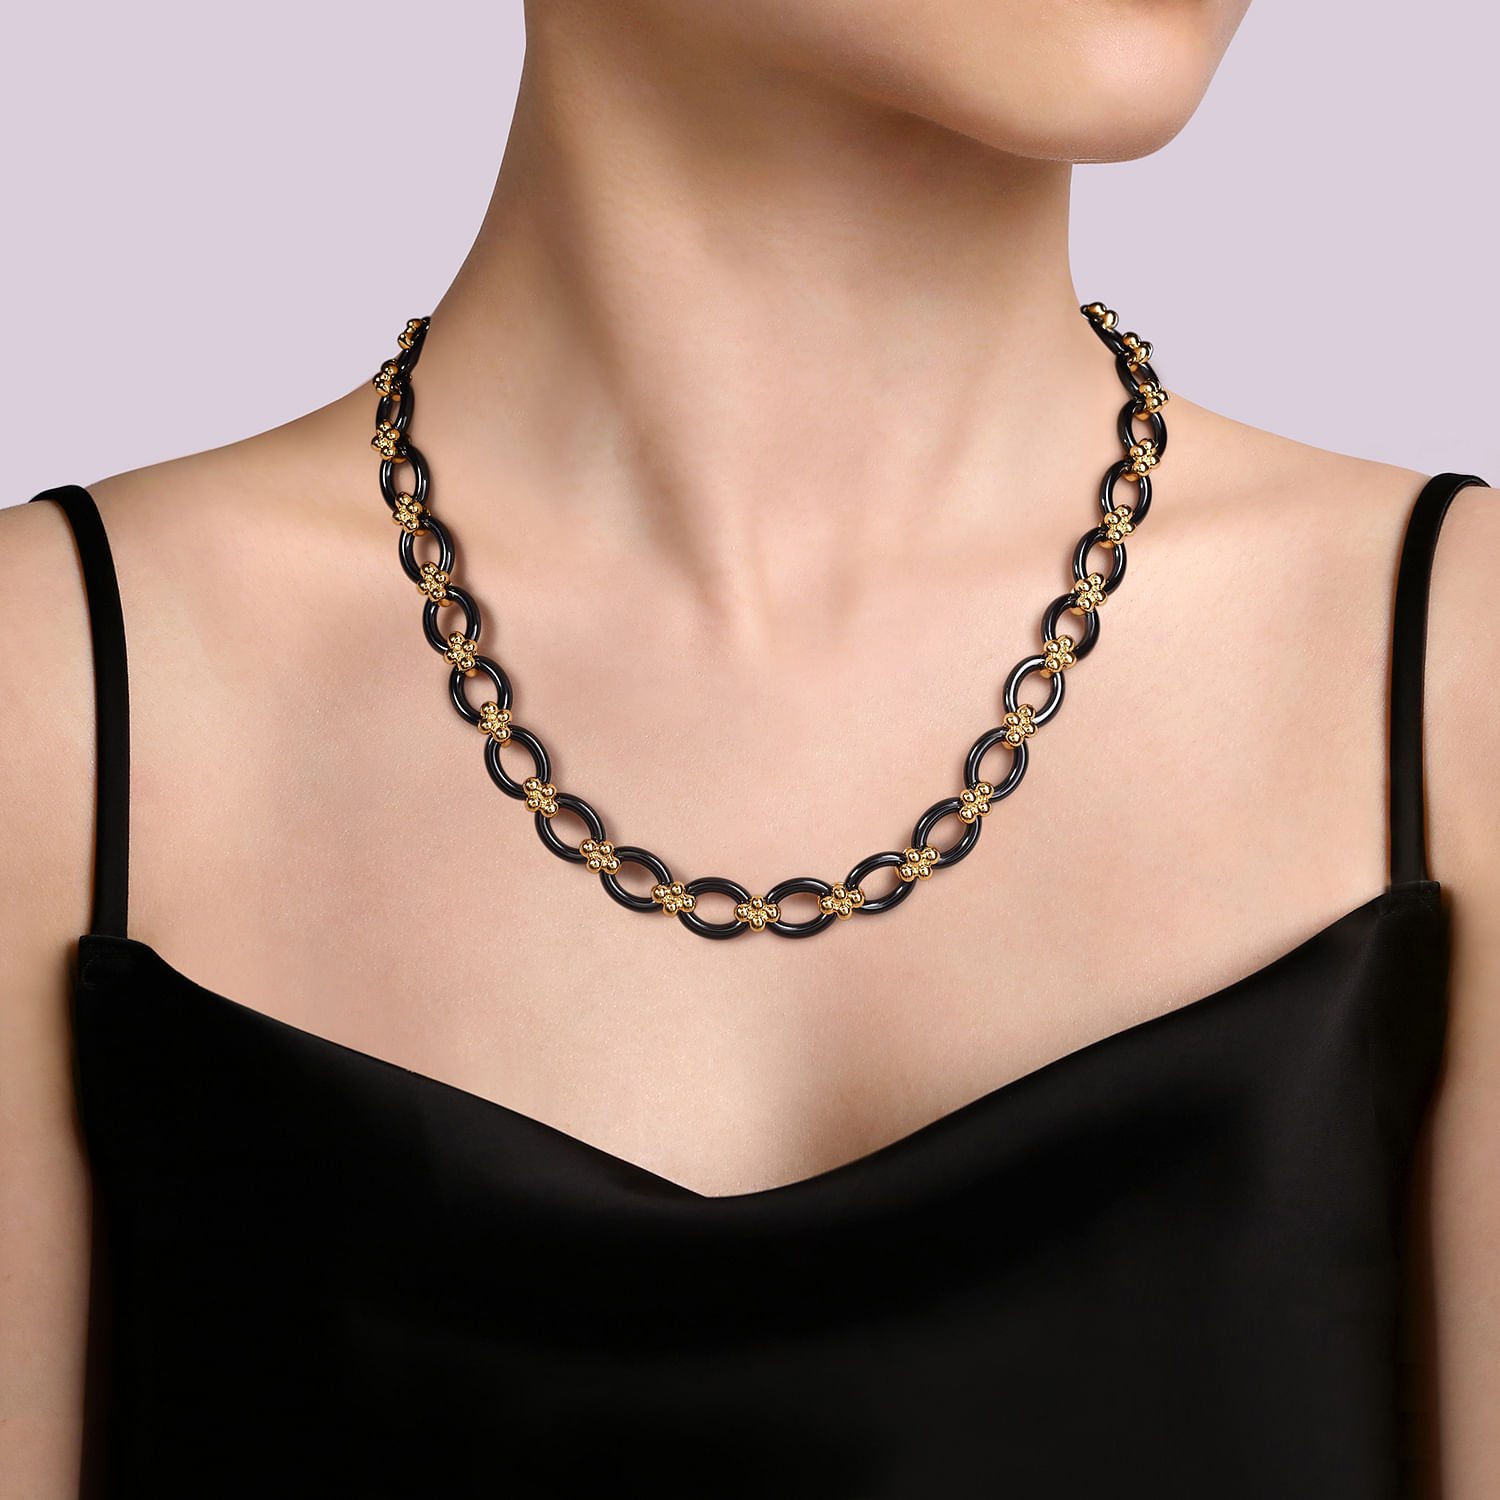 Gold Oval Chain Necklace, chunky front clasp necklace, black